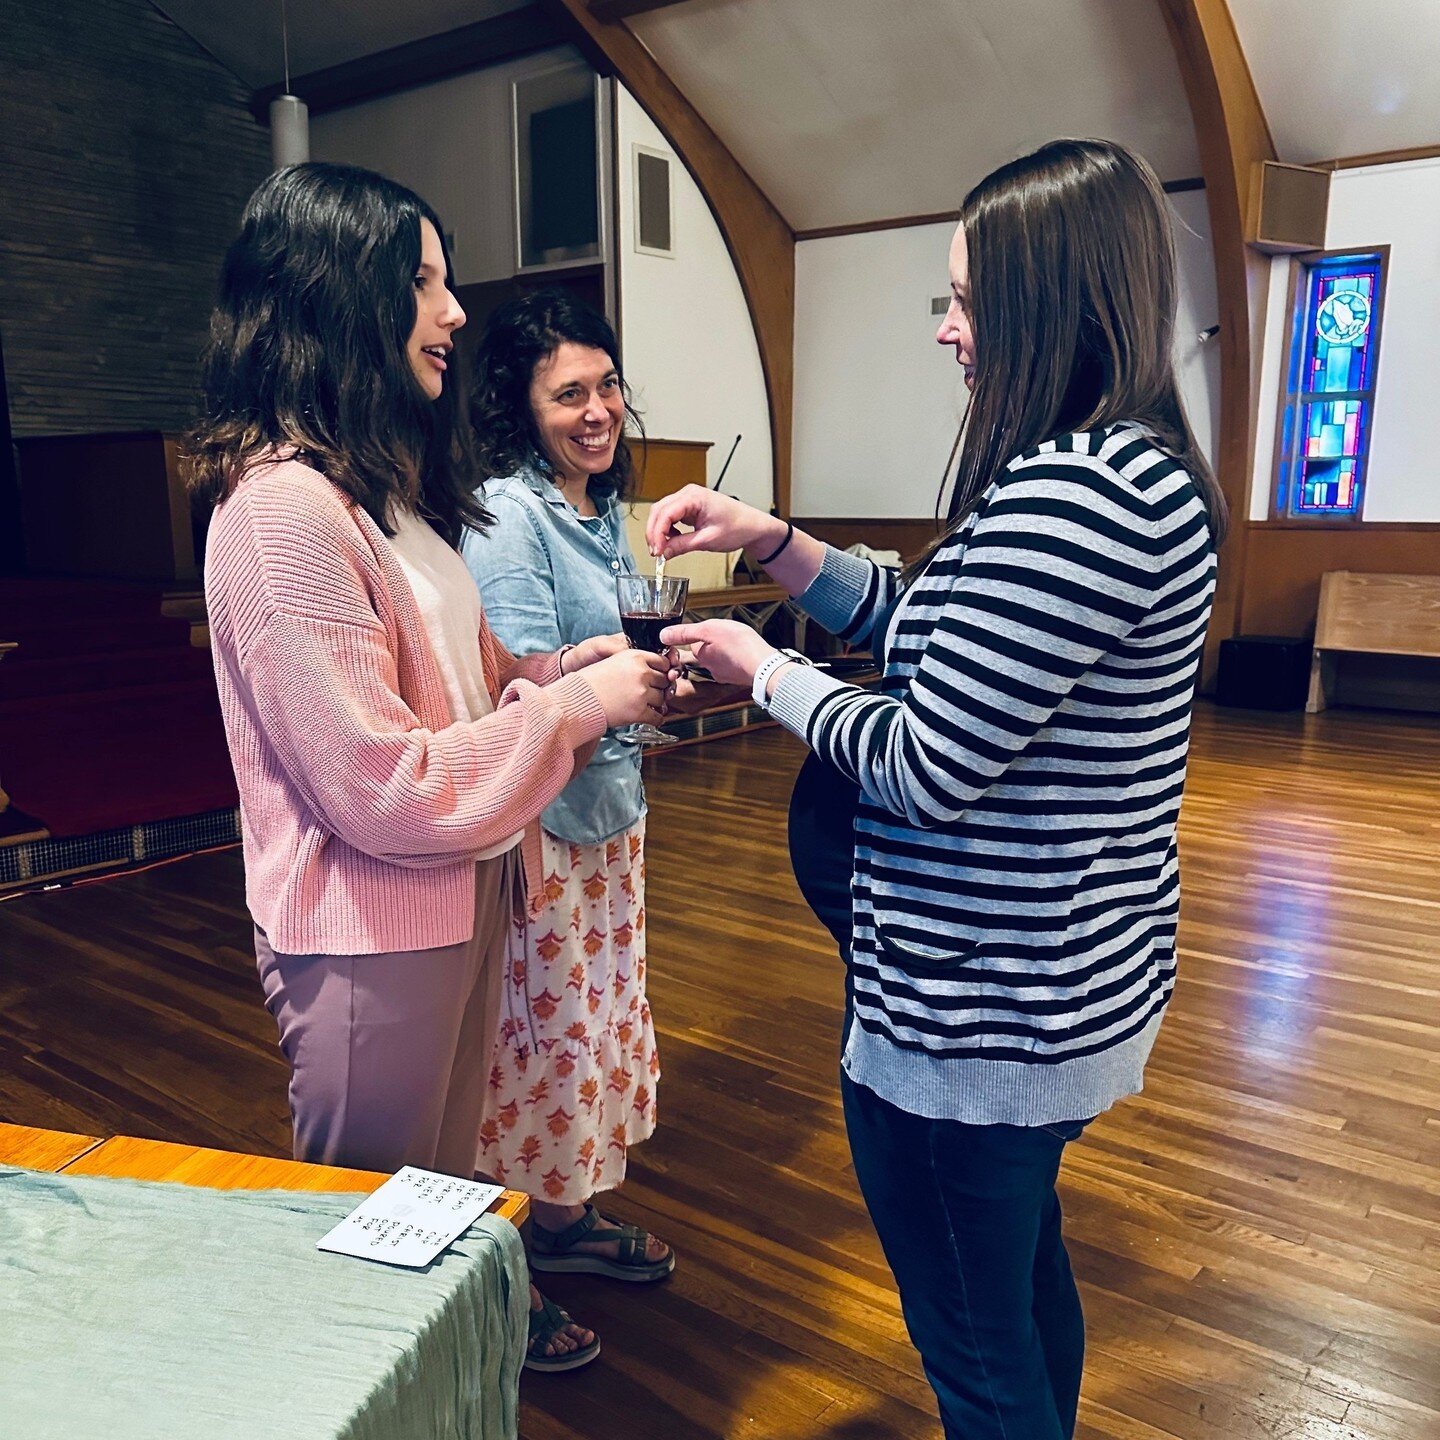 We are looking for volunteers to help with prepping, decorating and serving communion! If you're interested please follow the link in our bio to sign-up and find more information.